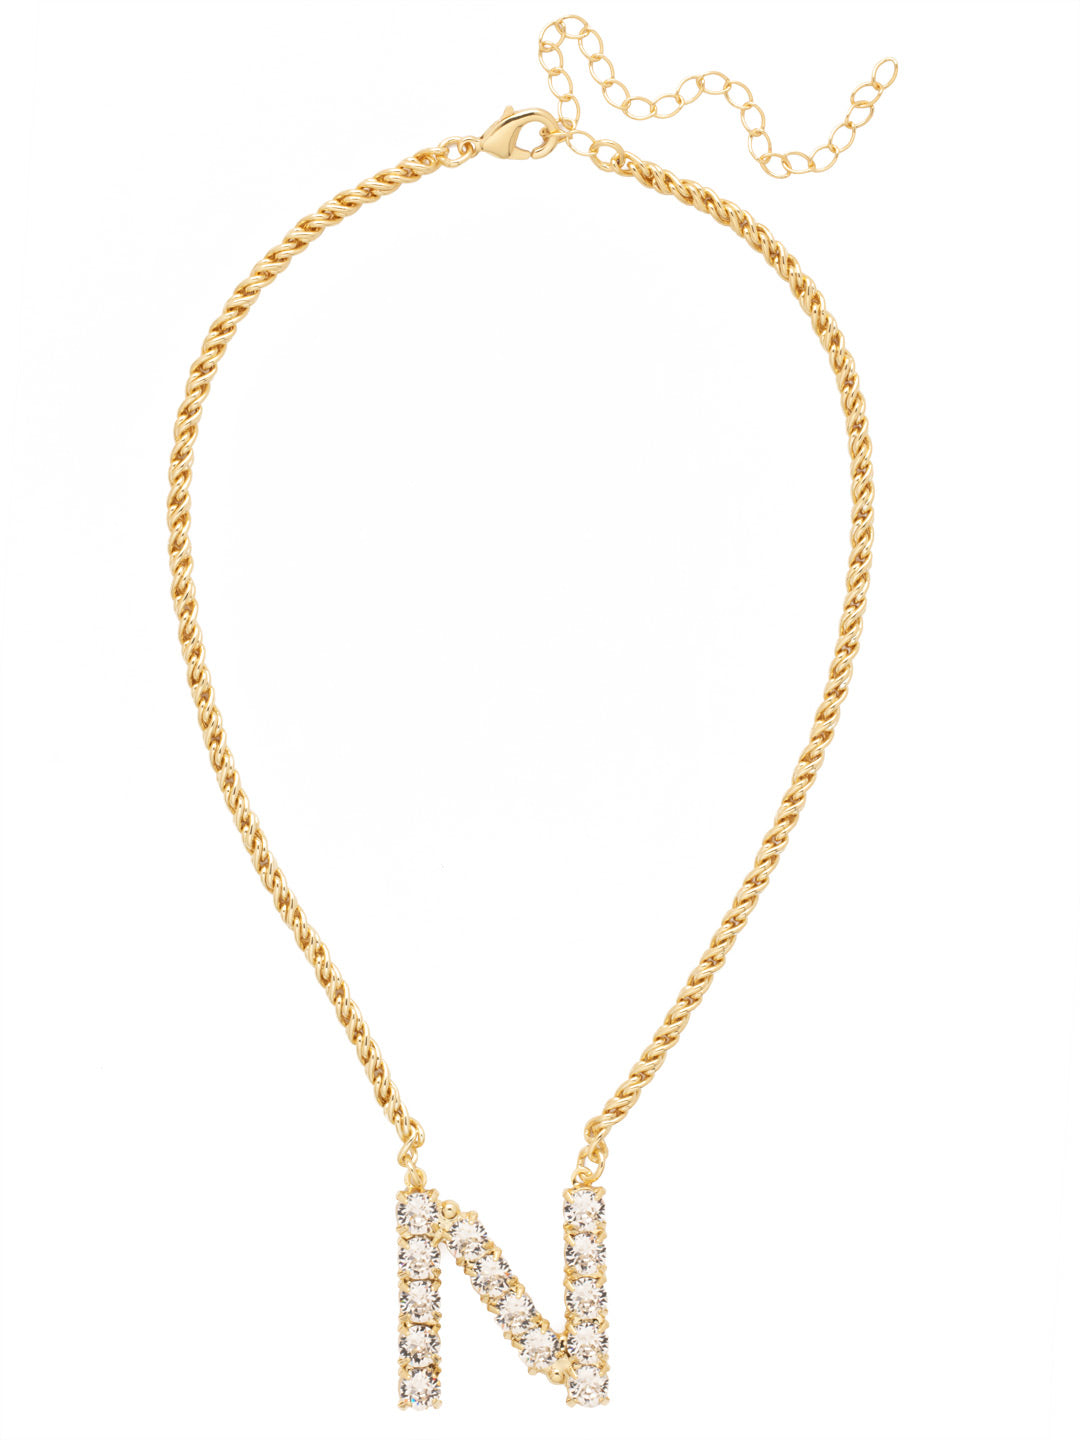 N Initial Rope Pendant Necklace - NFK33BGCRY - <p>The Initial Rope Pendant Necklace features a crystal encrusted metal monogram pendant on an adjustable rope chain, secured with a lobster claw clasp. From Sorrelli's Crystal collection in our Bright Gold-tone finish.</p>